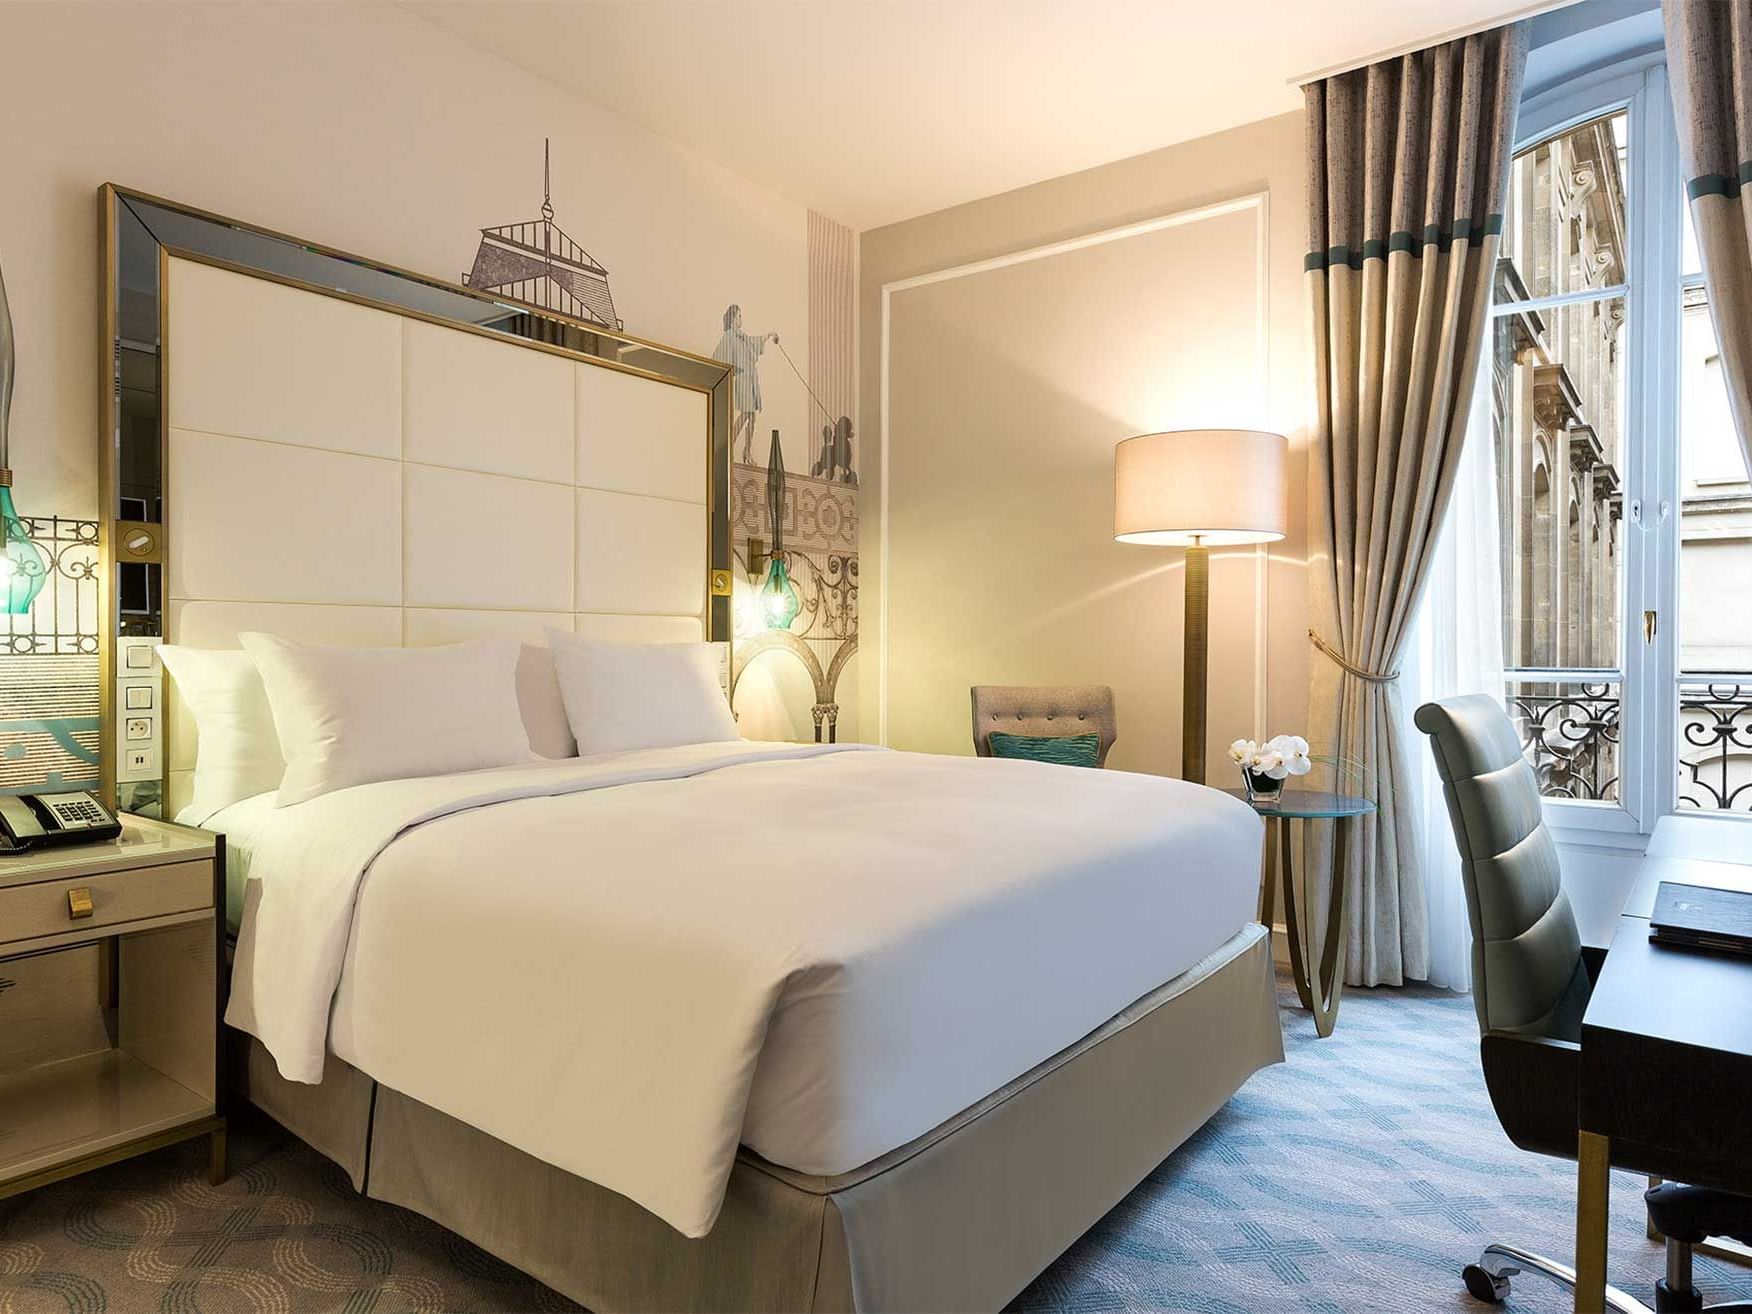 Bed & furniture in Deluxe Room at Hilton Paris Opera Hotel